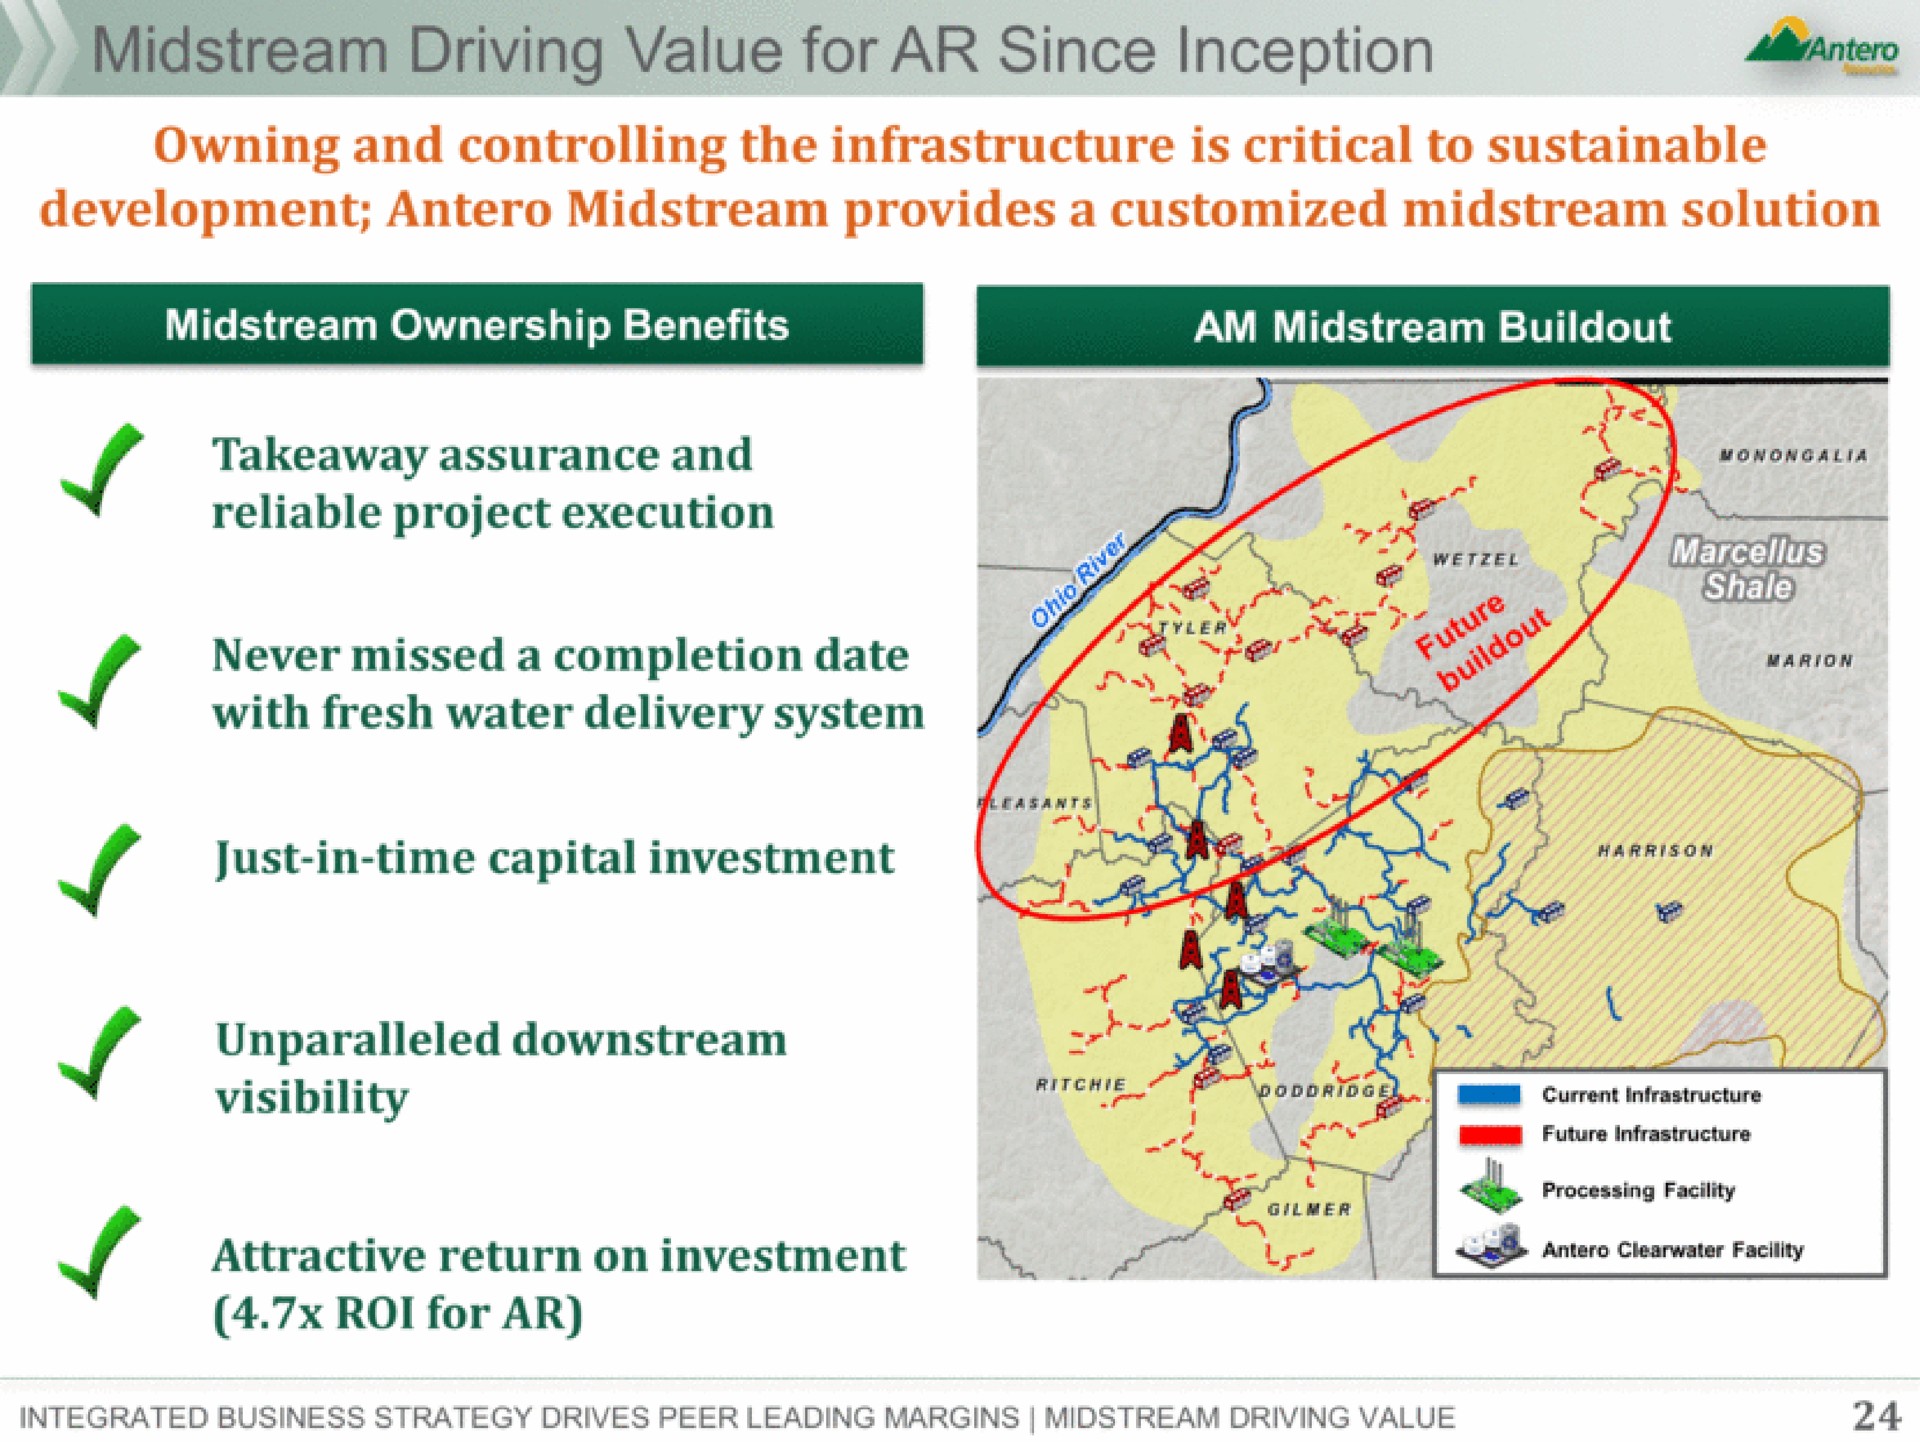 midstream driving value for since inception owning and controlling the infrastructure is critical to sustainable development midstream provides a midstream solution a assurance and reliable project execution with fresh water delivery system just in time capital investment unparalleled downstream roi for | Antero Midstream Partners